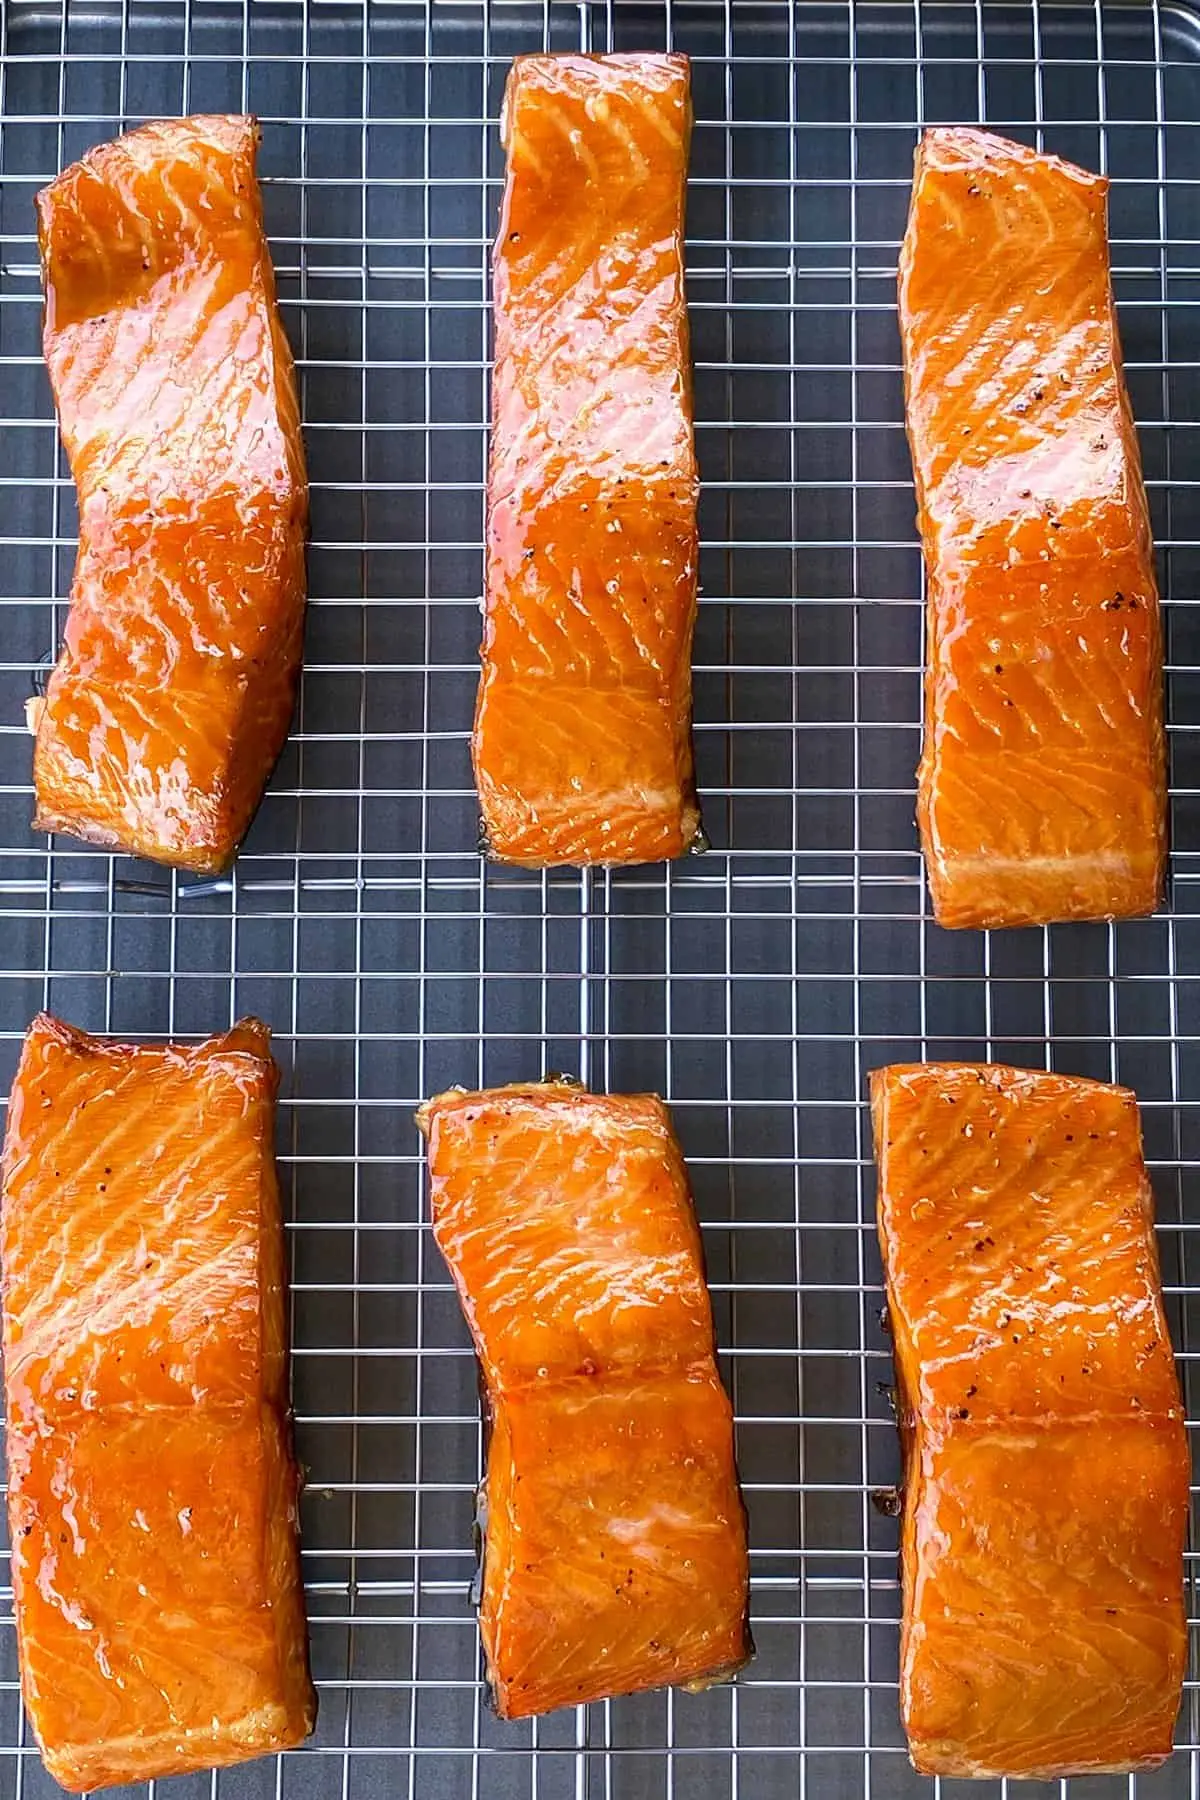 smoked salmon fillet cooking time - What temp do you cook smoked salmon to